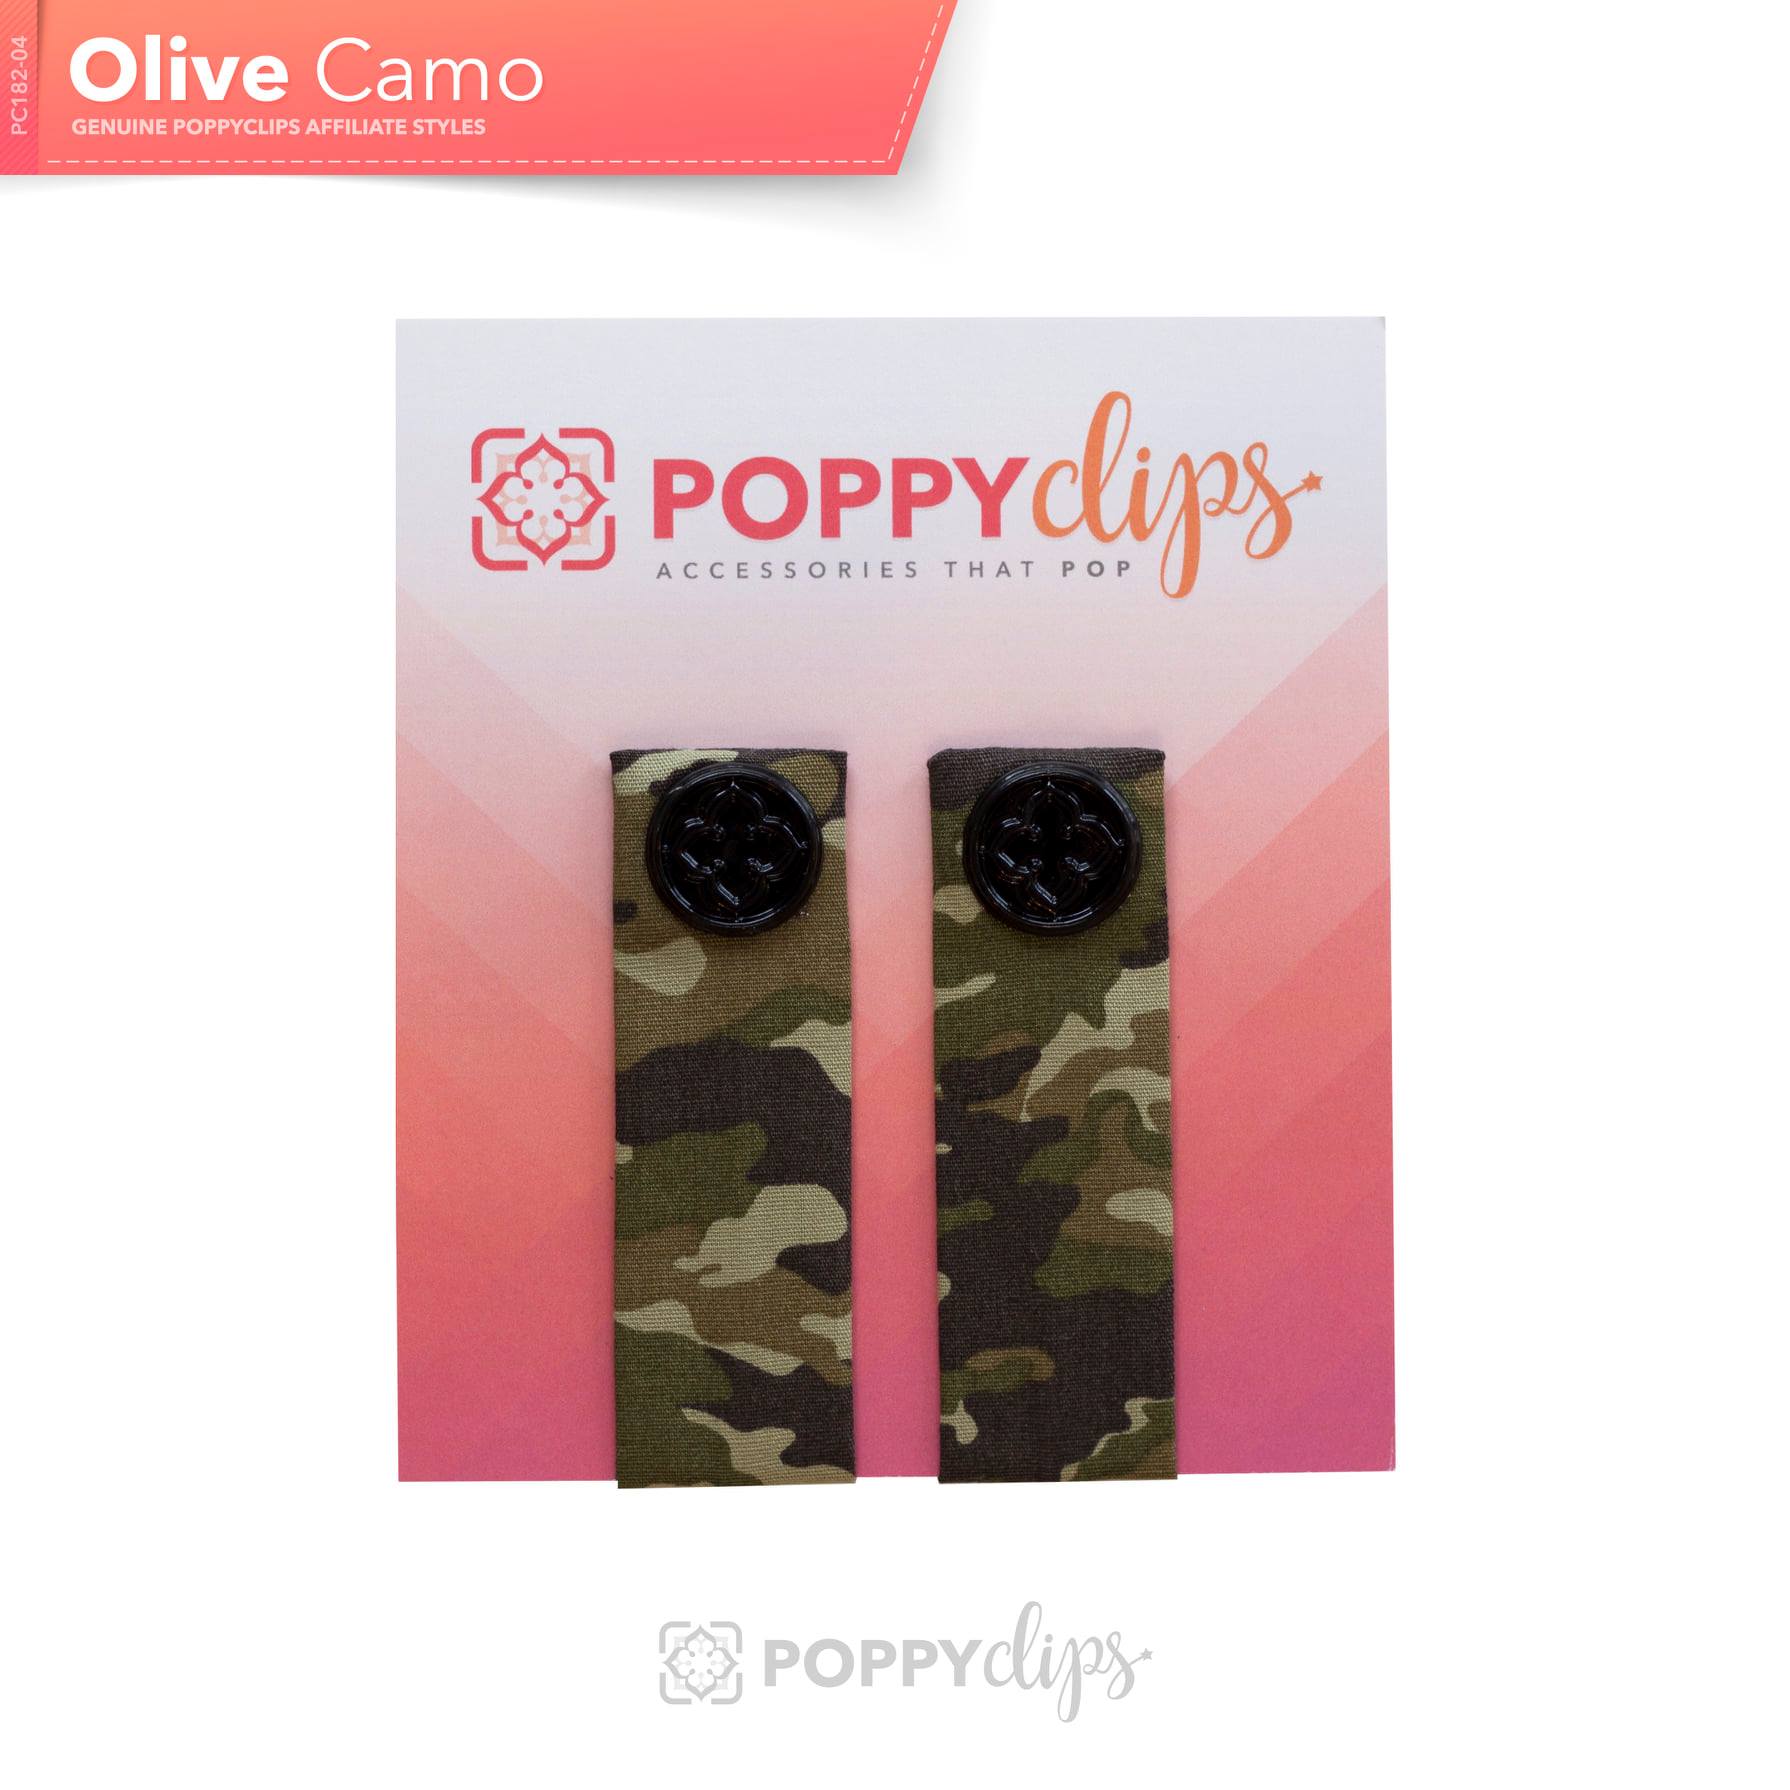 Two 5 ¼” long by 7/8” wide traditional camo colored material with a magnet at each end.  The outer magnet is a decorative black medallion with the company logo. 